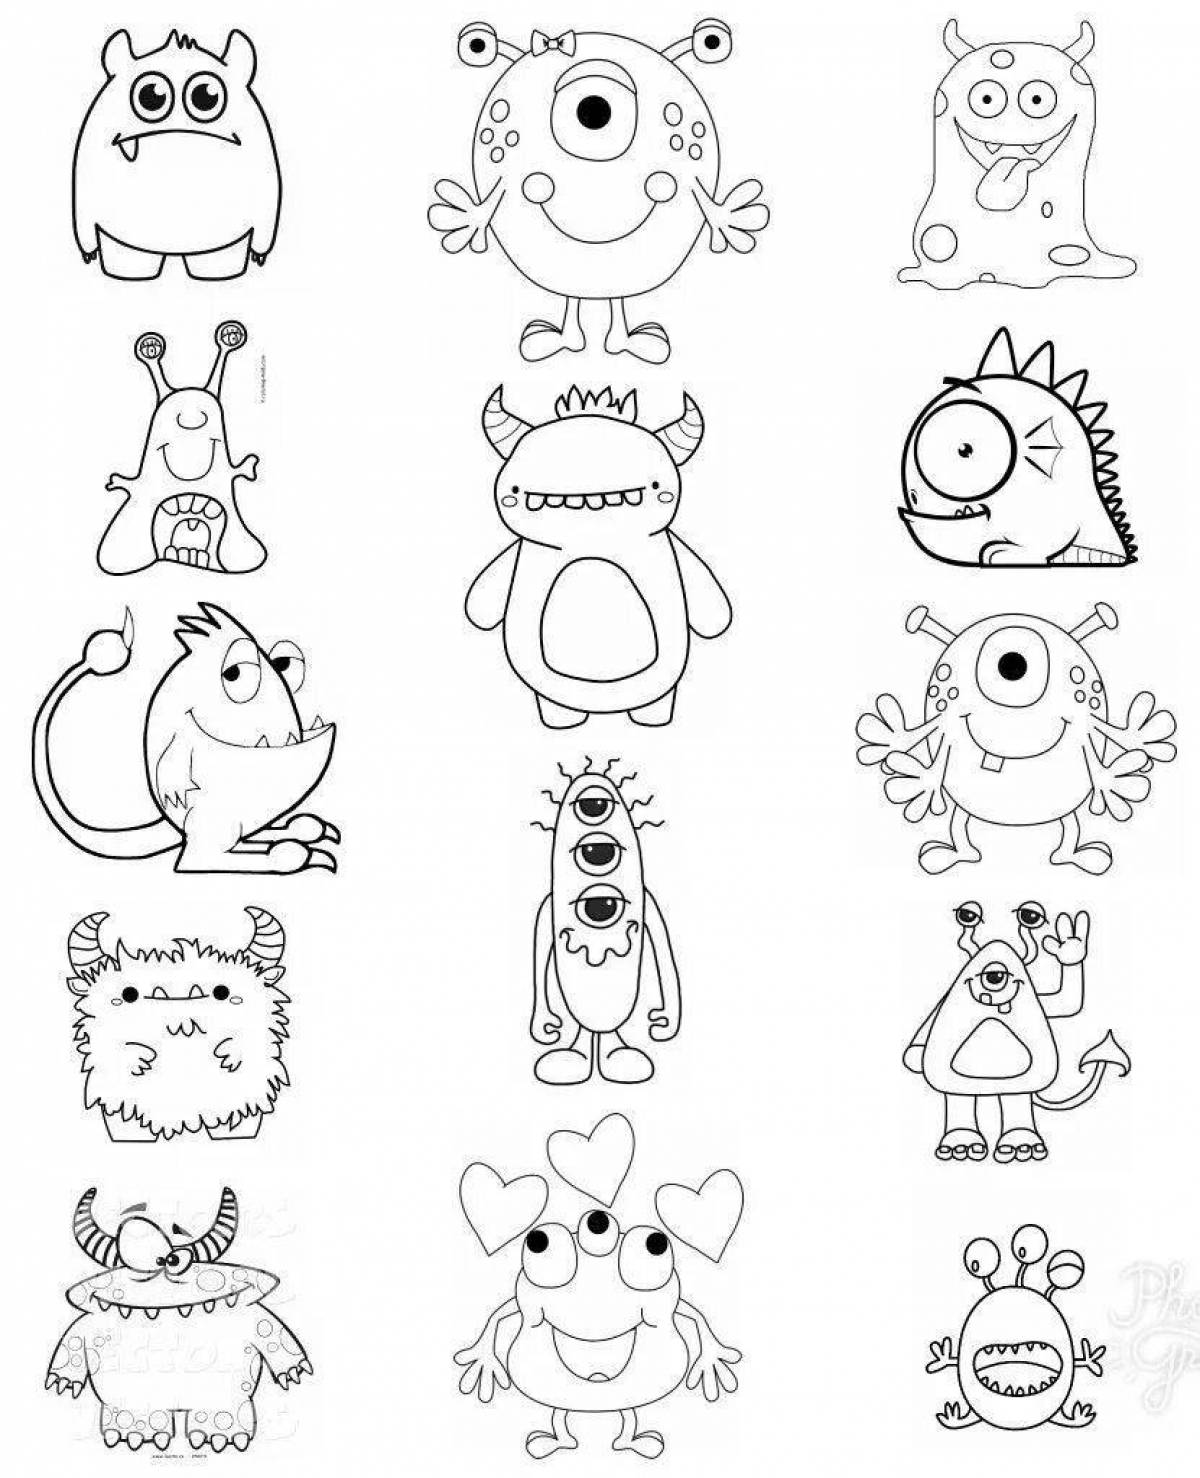 Amazing coloring pages funny monsters